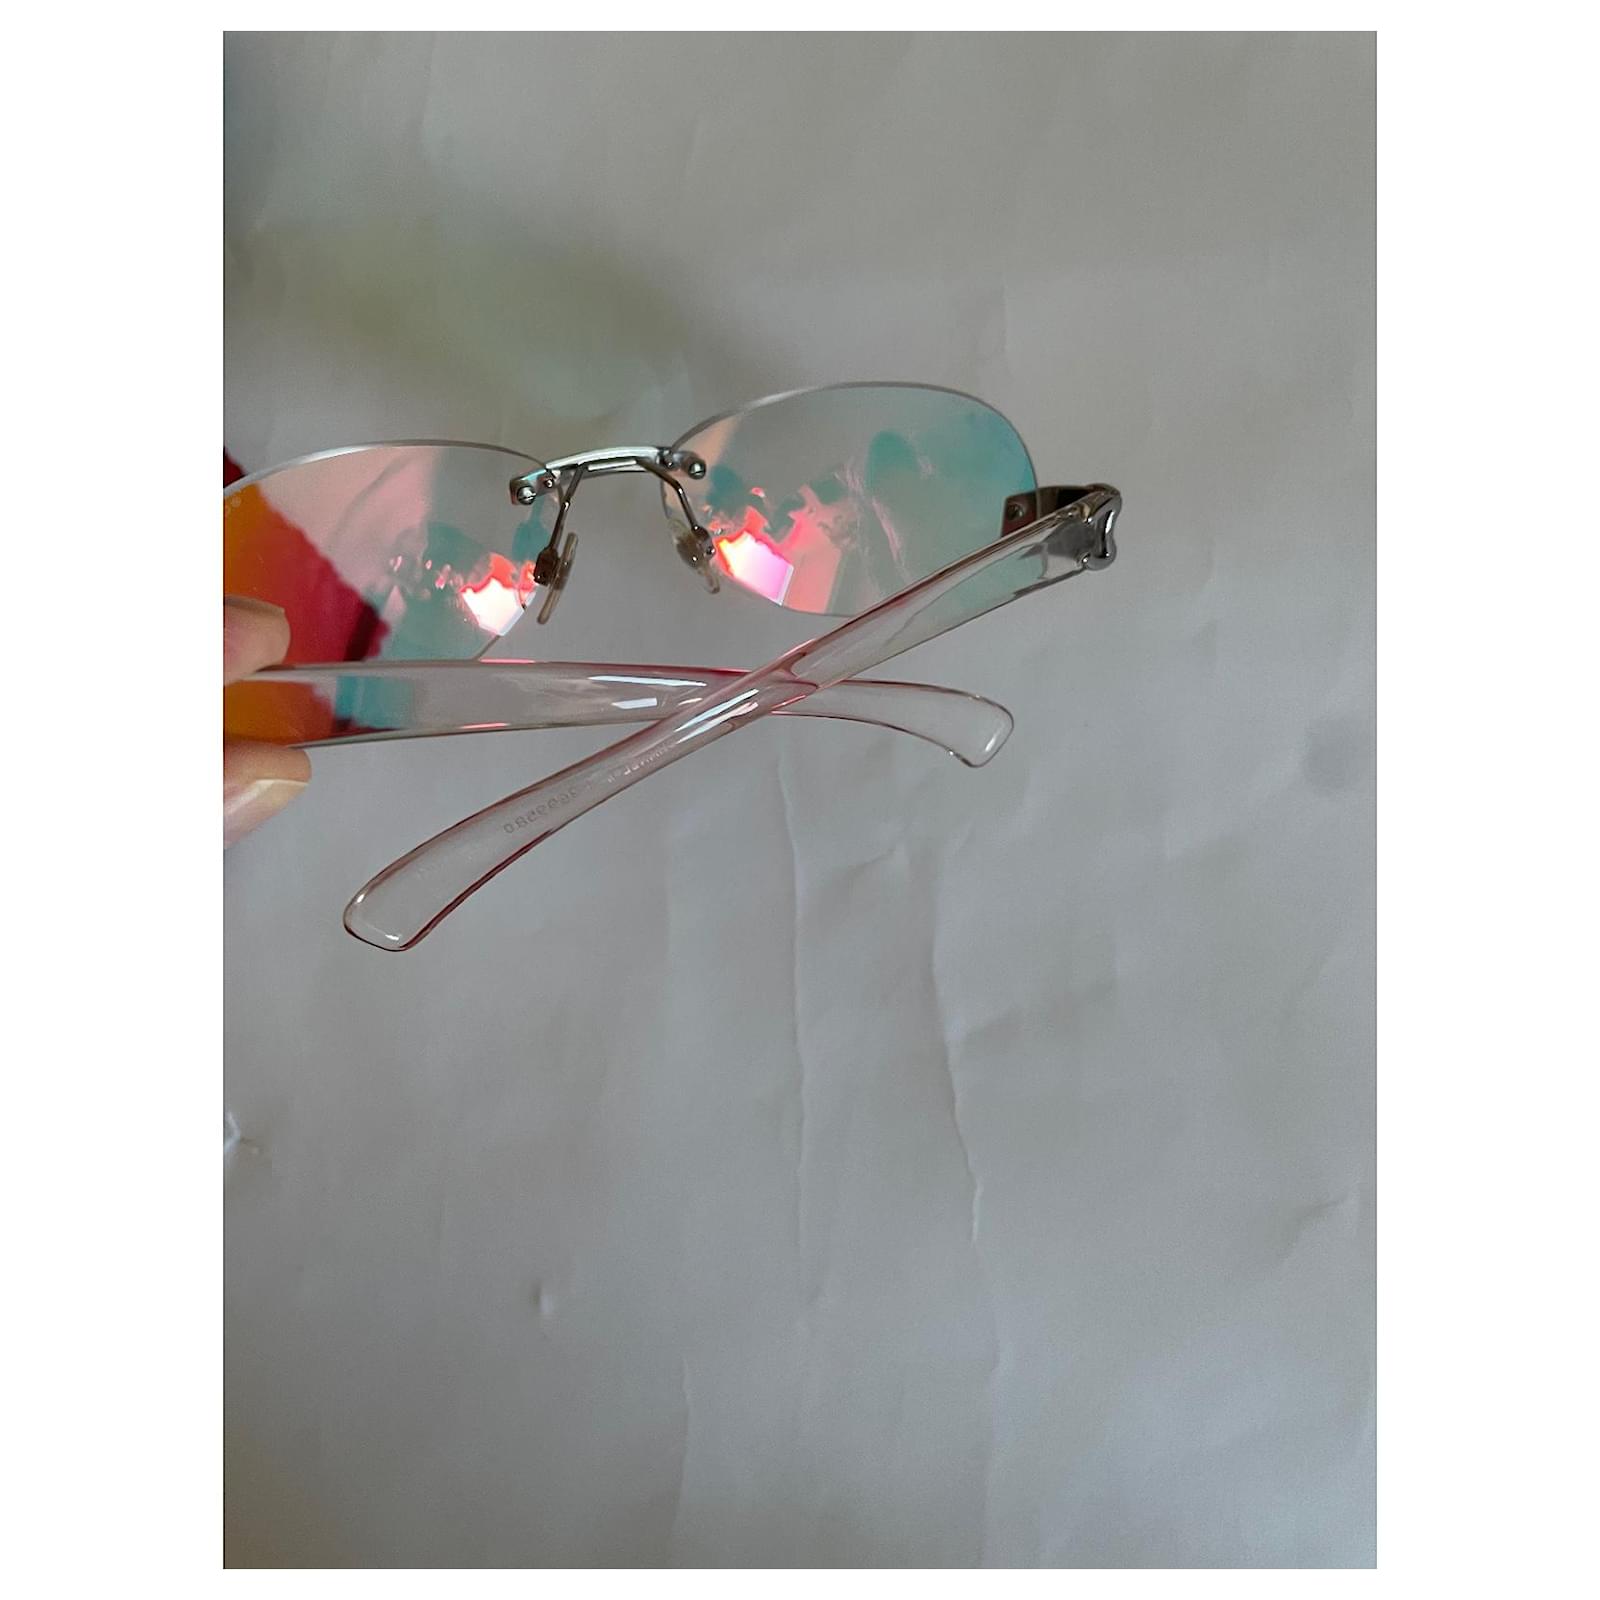 CHANEL, Accessories, Chanel 402 Rimless Cc Vintage Y2k Sunglasses In Rare  Holographic Iridescent Hue